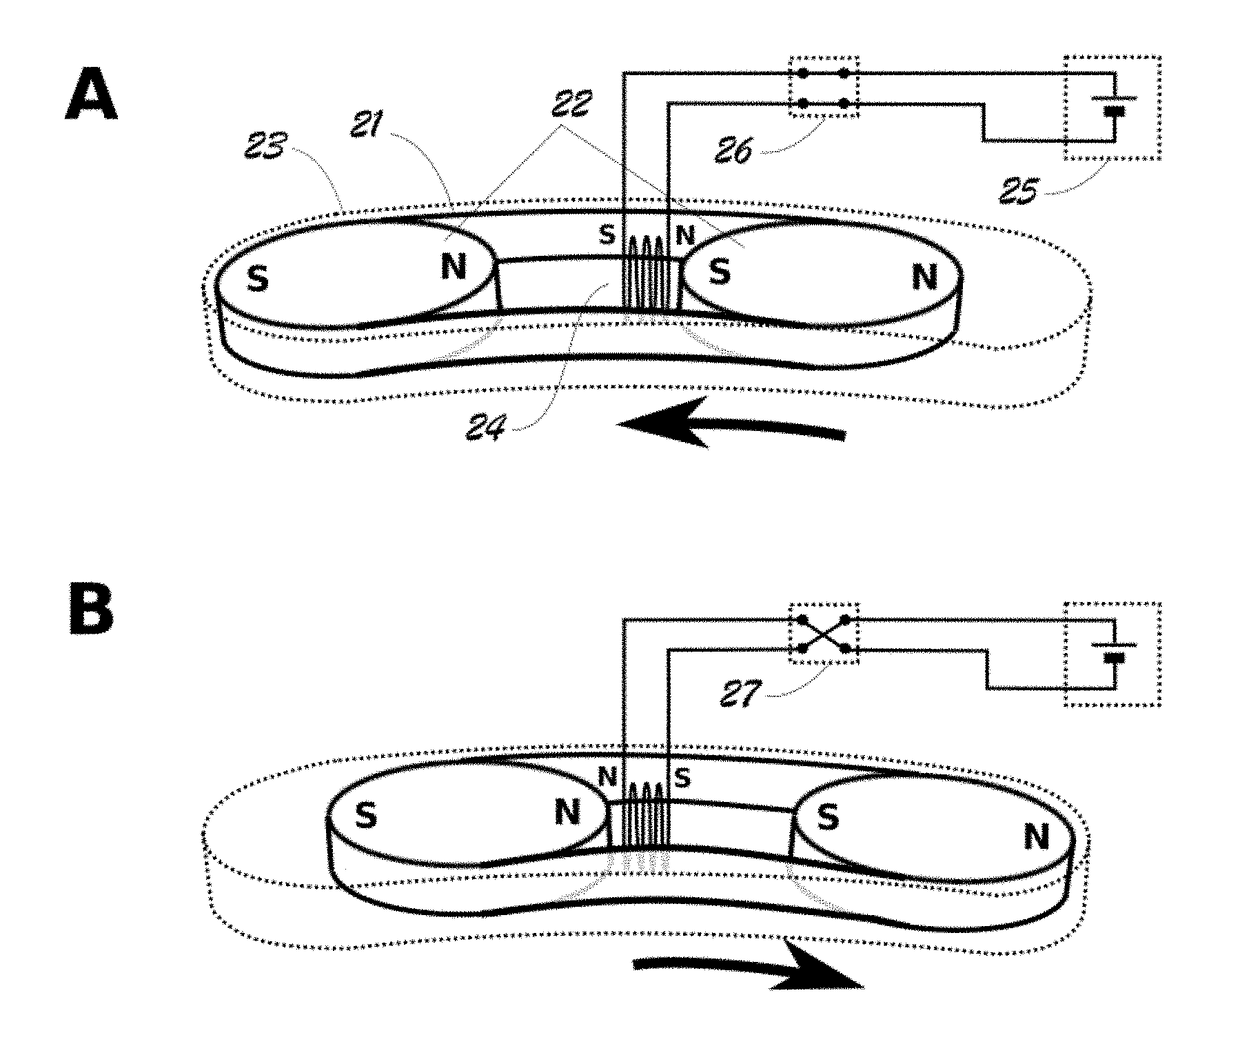 Time-Varying Magnetic Field Therapy Using Multistable Latching Mechanisms